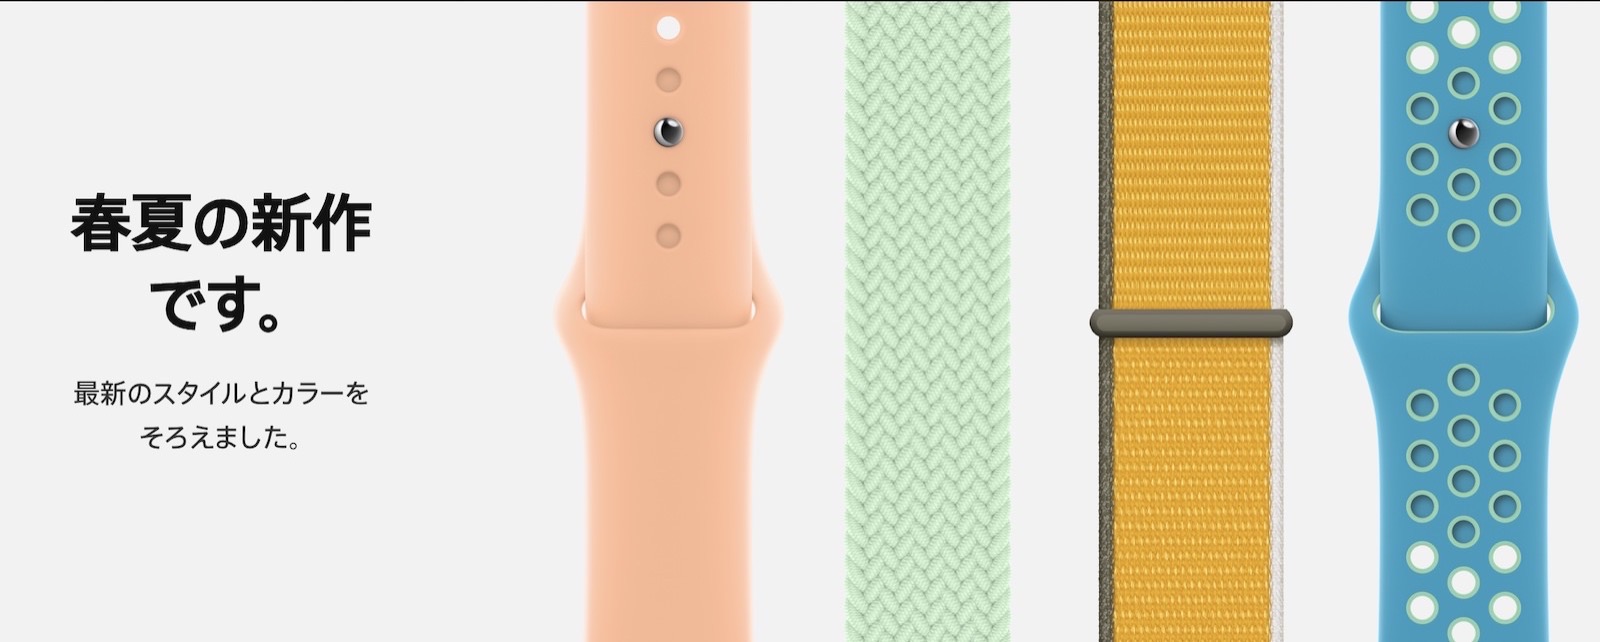 Apple Watch Band Spring Colors